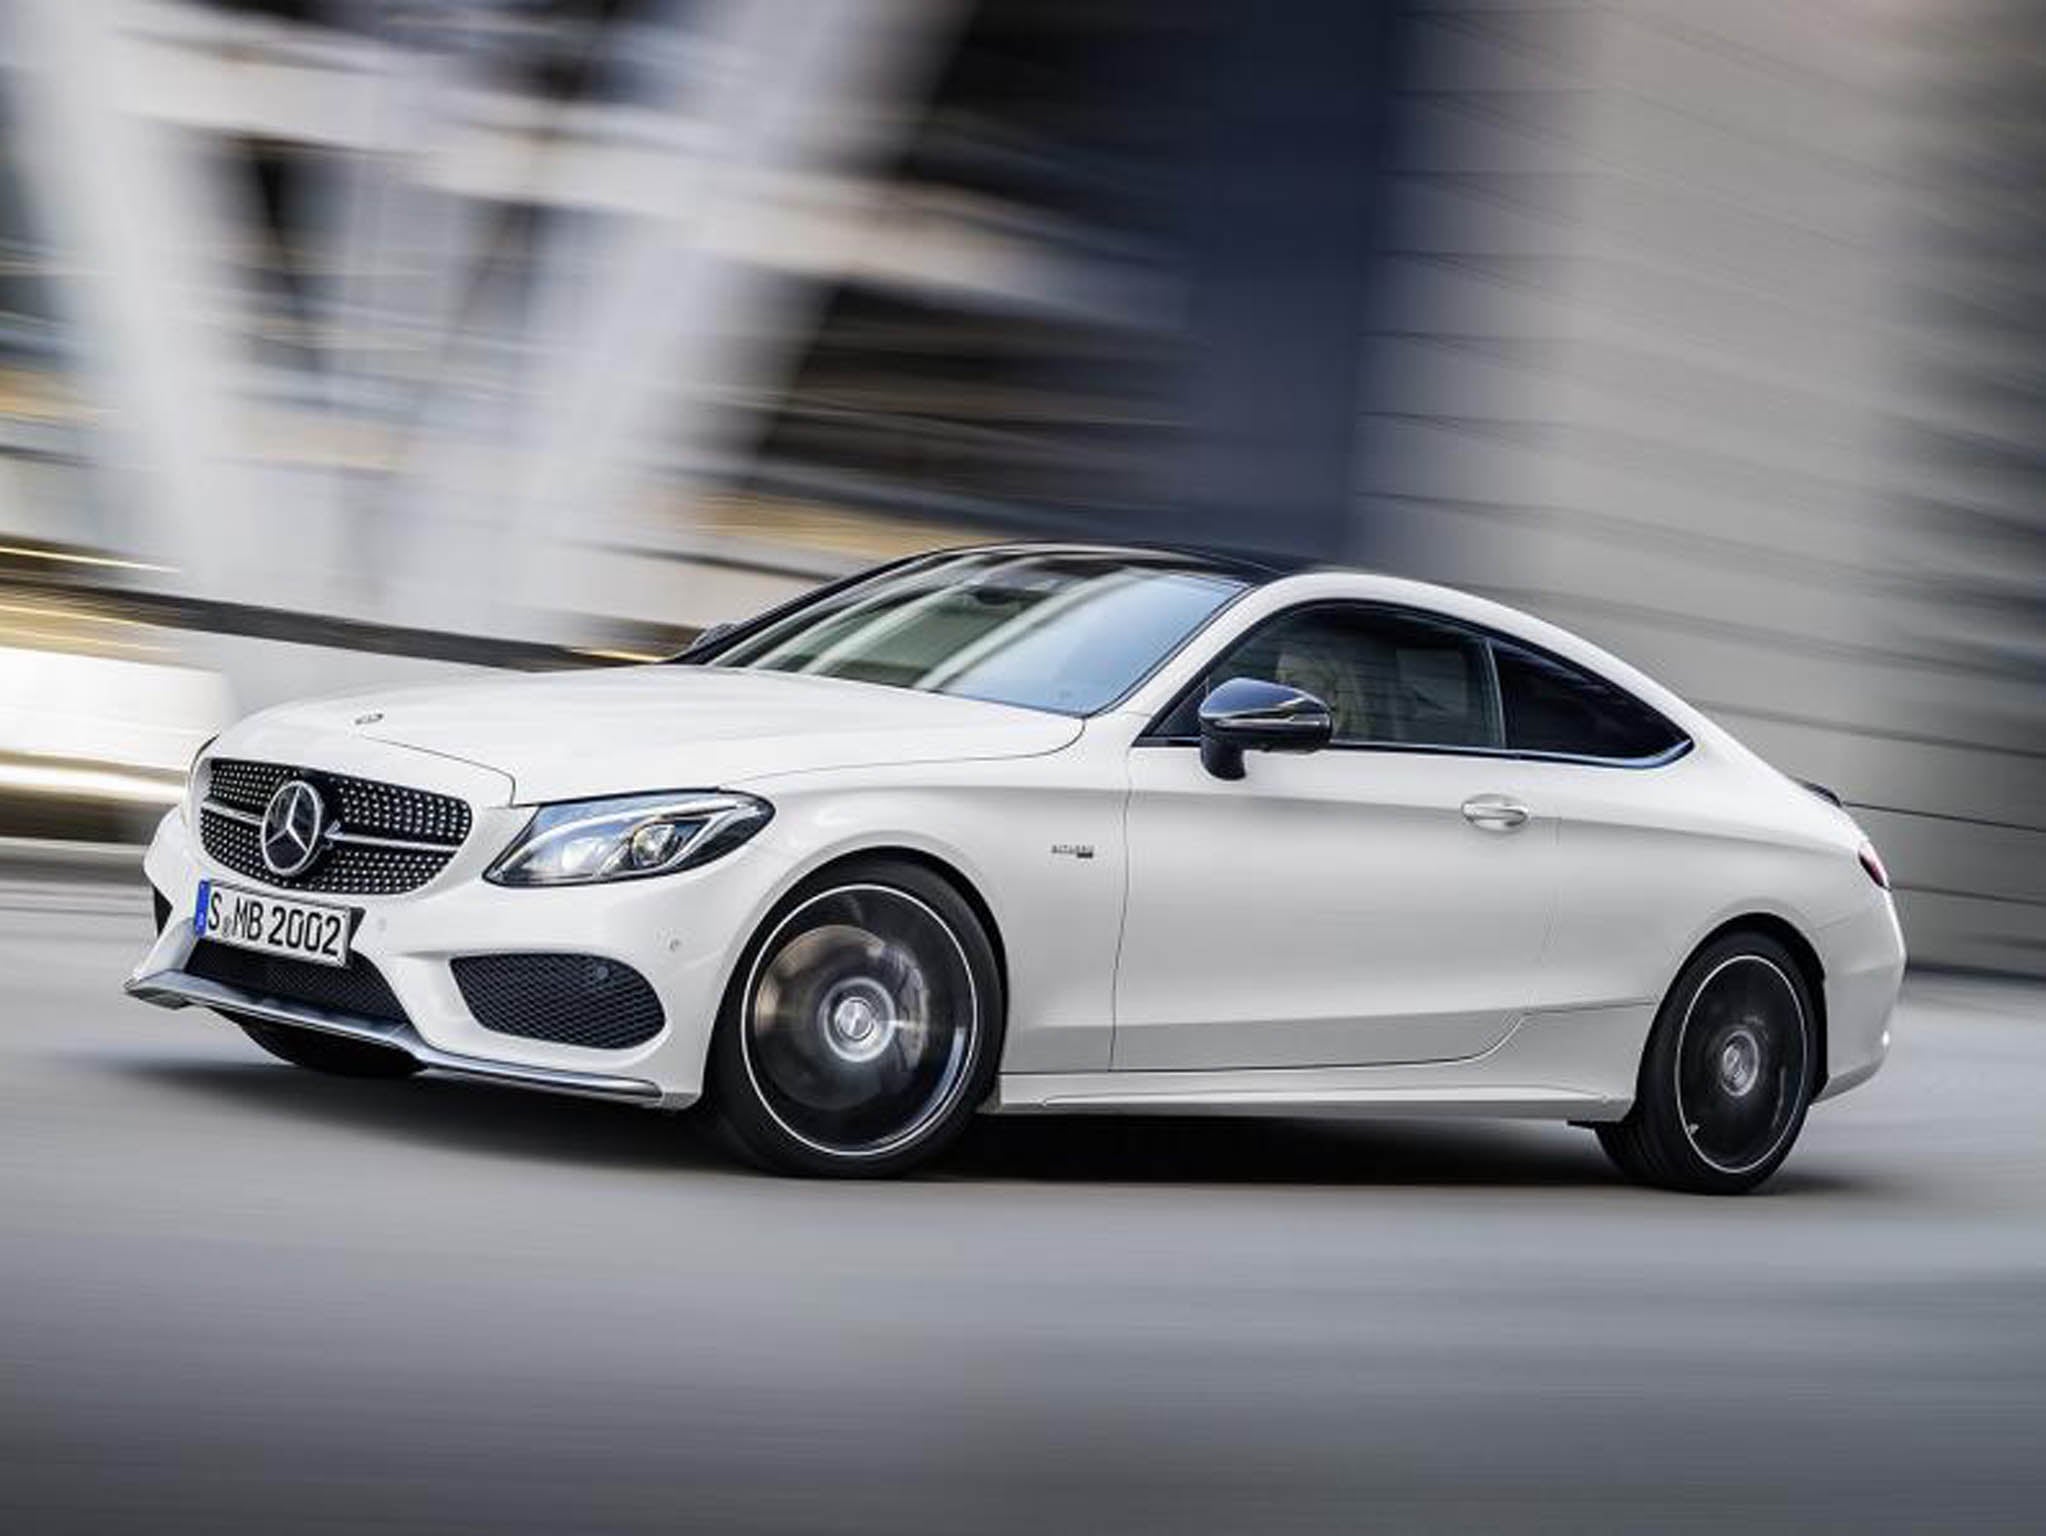 The Mercedes-AMG C43 Coupe will slot in beneath the C63 model in the upper echelons of the C-Class Coupe range